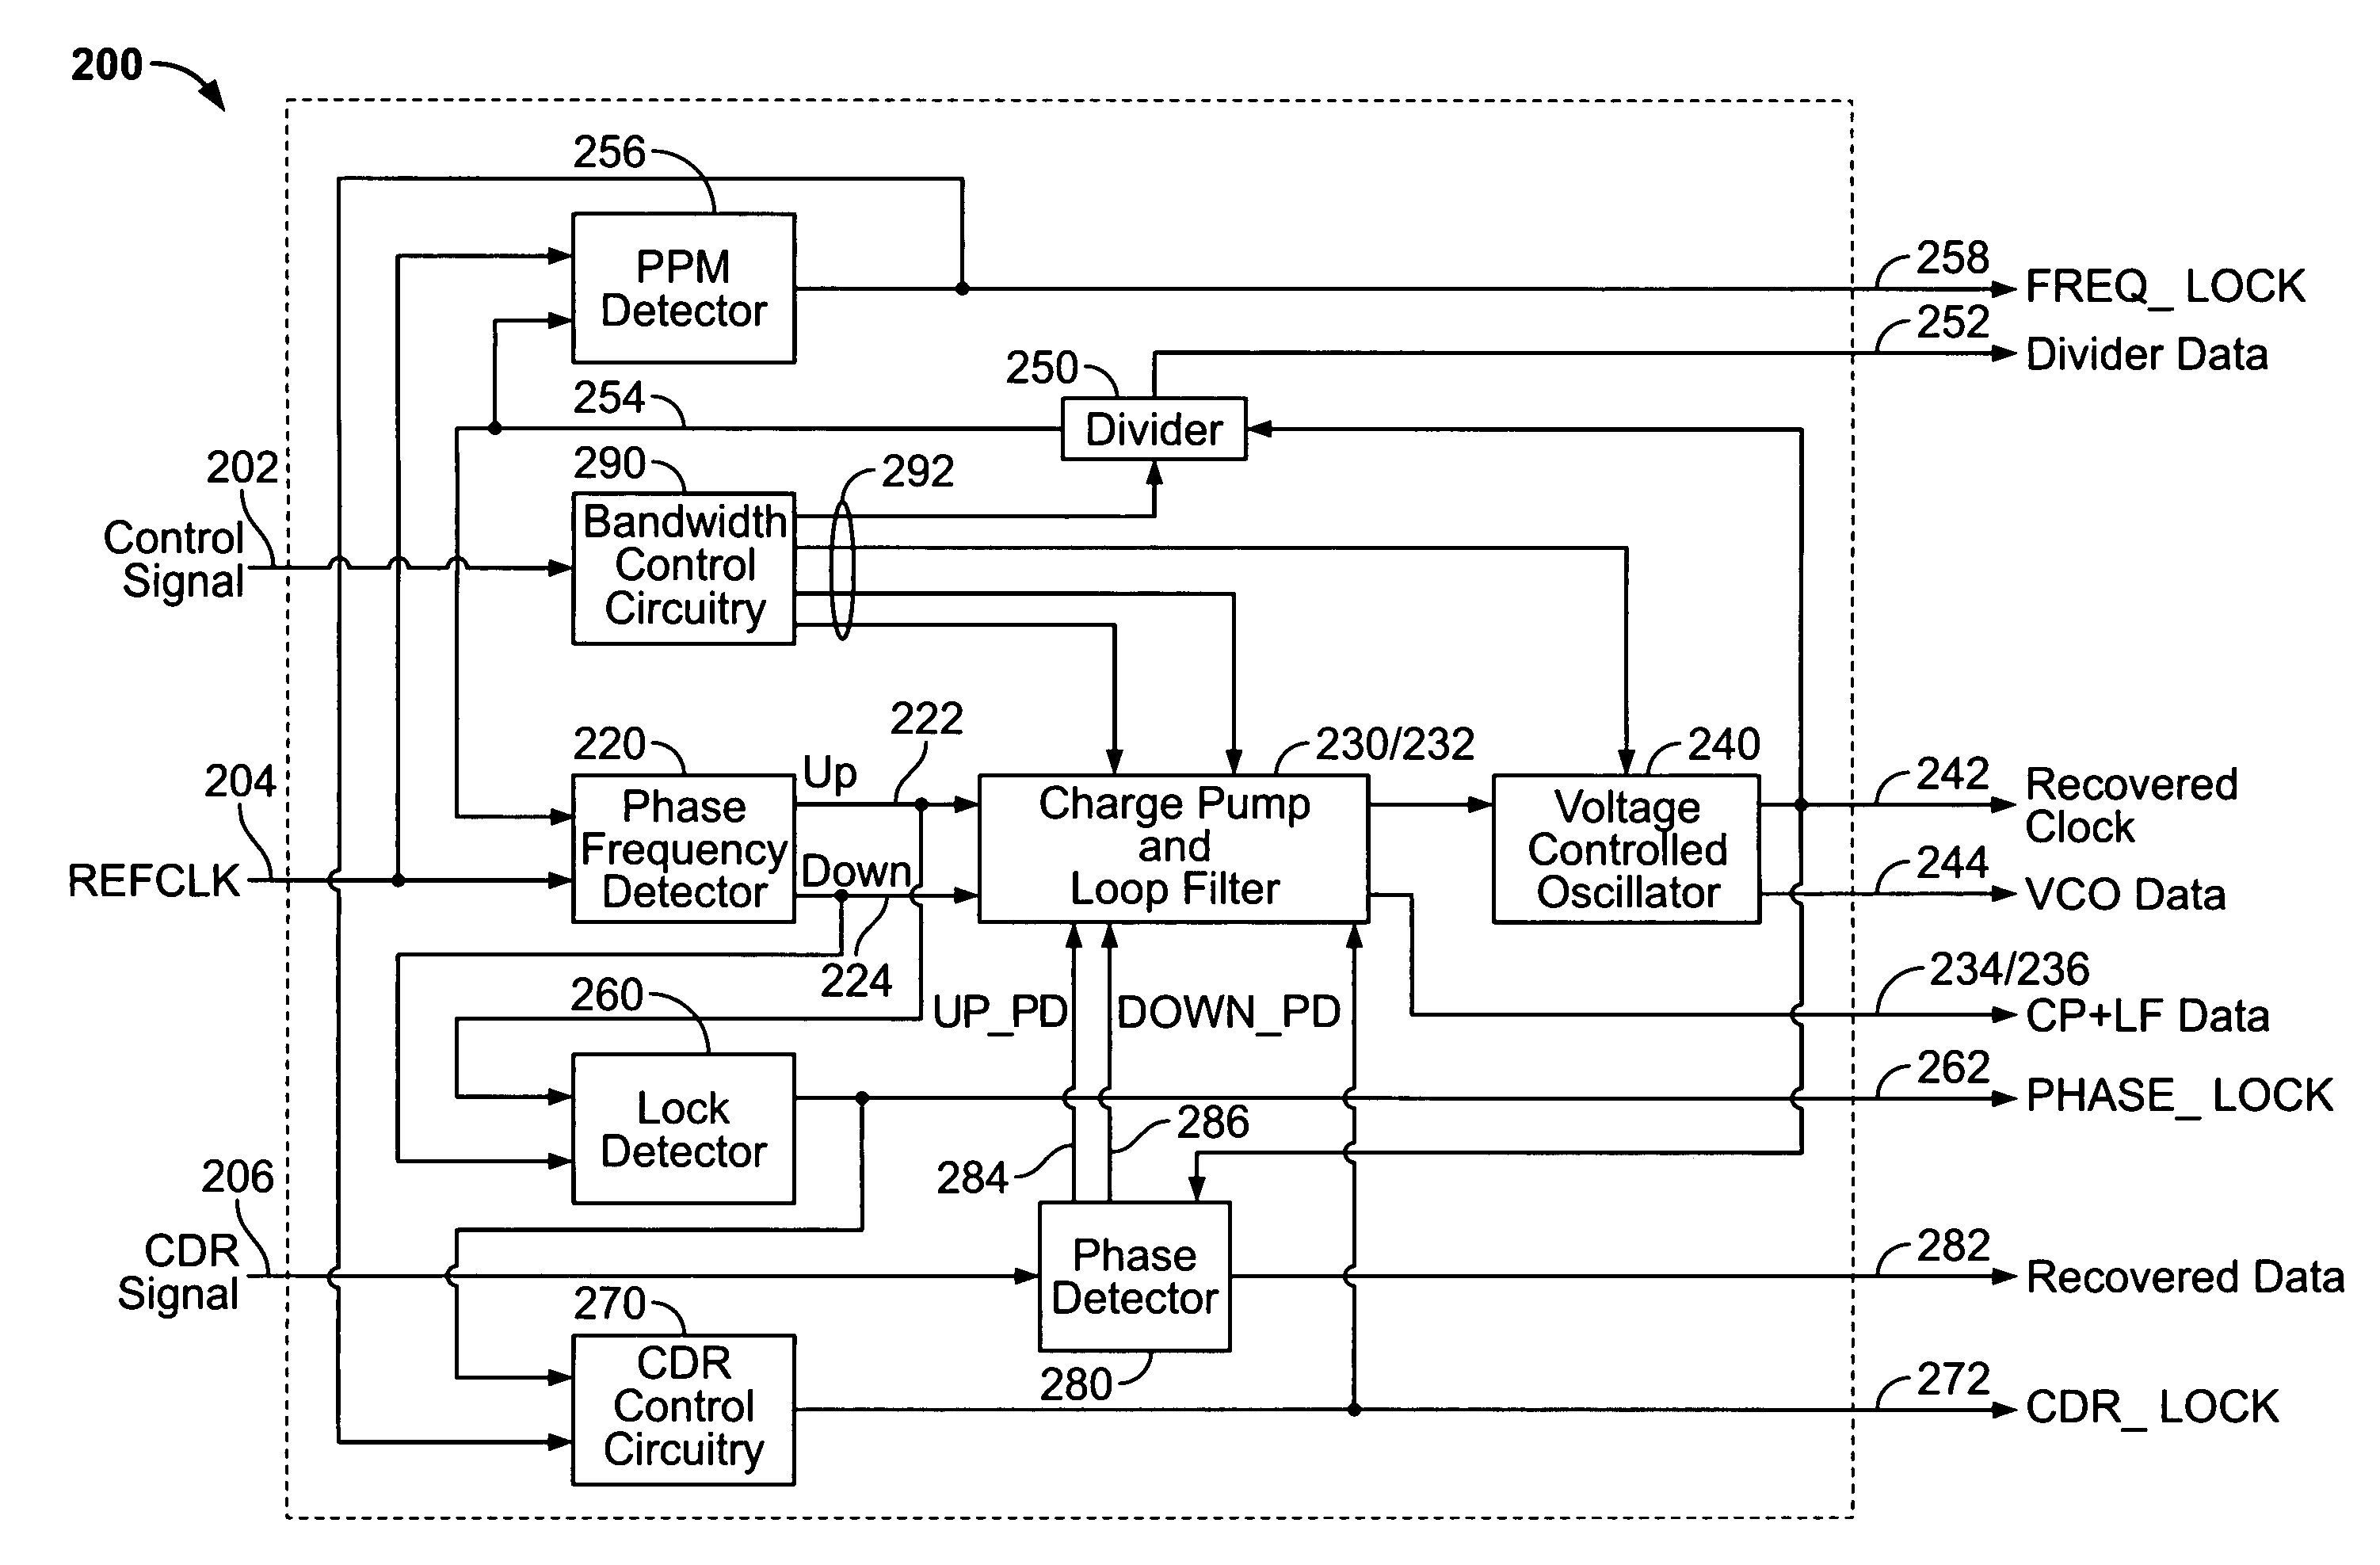 Clock data recovery circuitry and phase locked loop circuitry with dynamically adjustable bandwidths